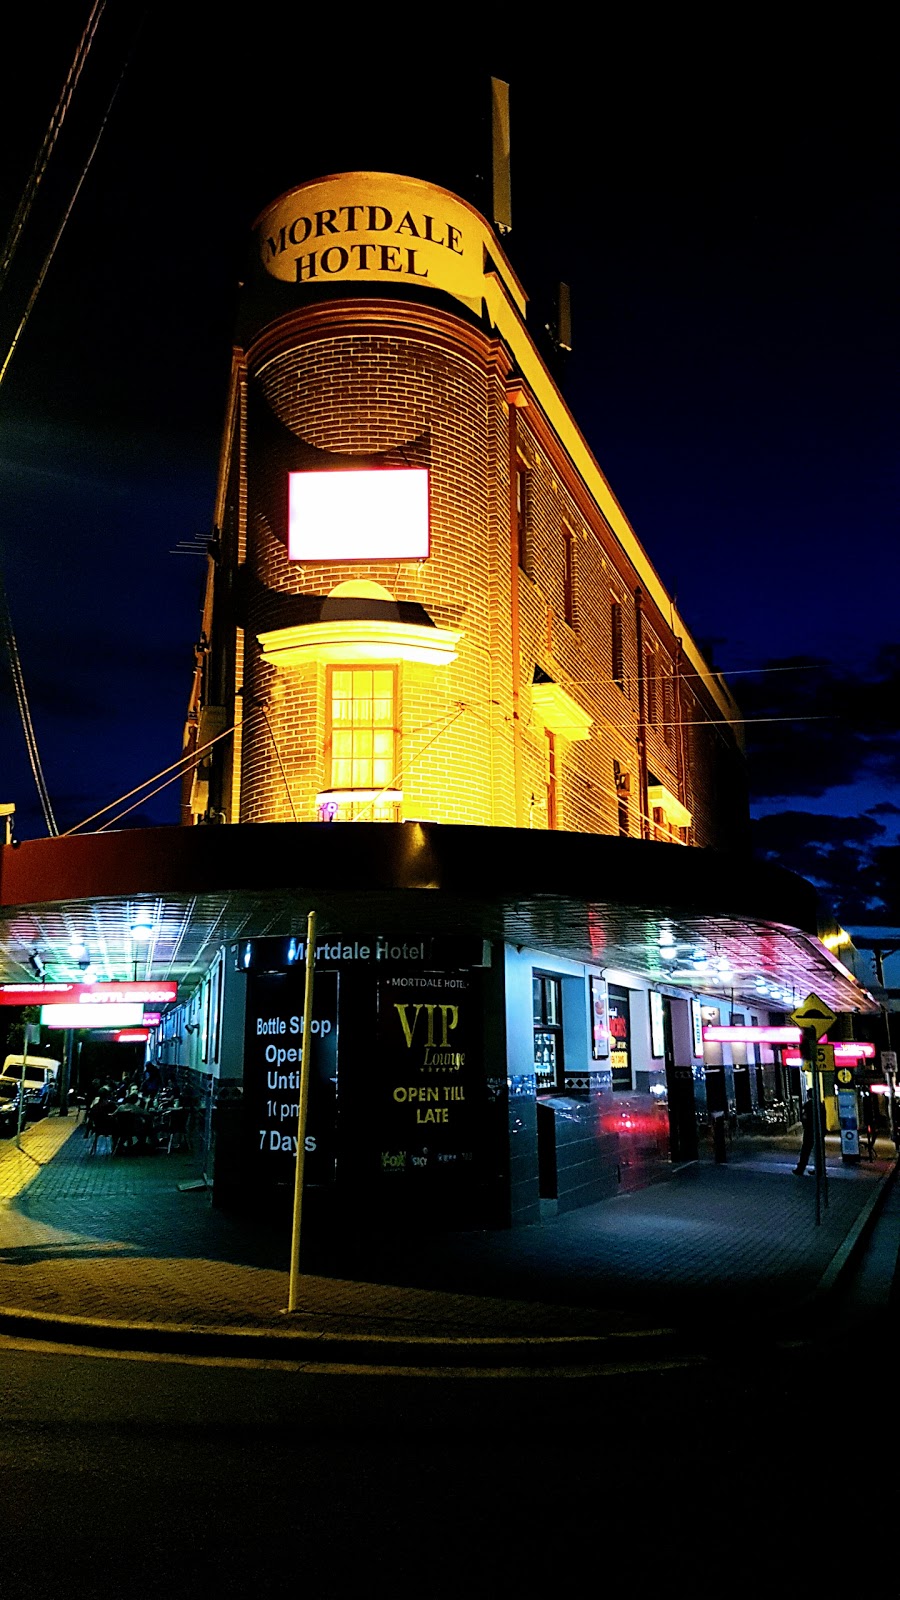 Mortdale Hotel | lodging | 1 Pitt St, Mortdale NSW 2223, Australia | 0295801174 OR +61 2 9580 1174